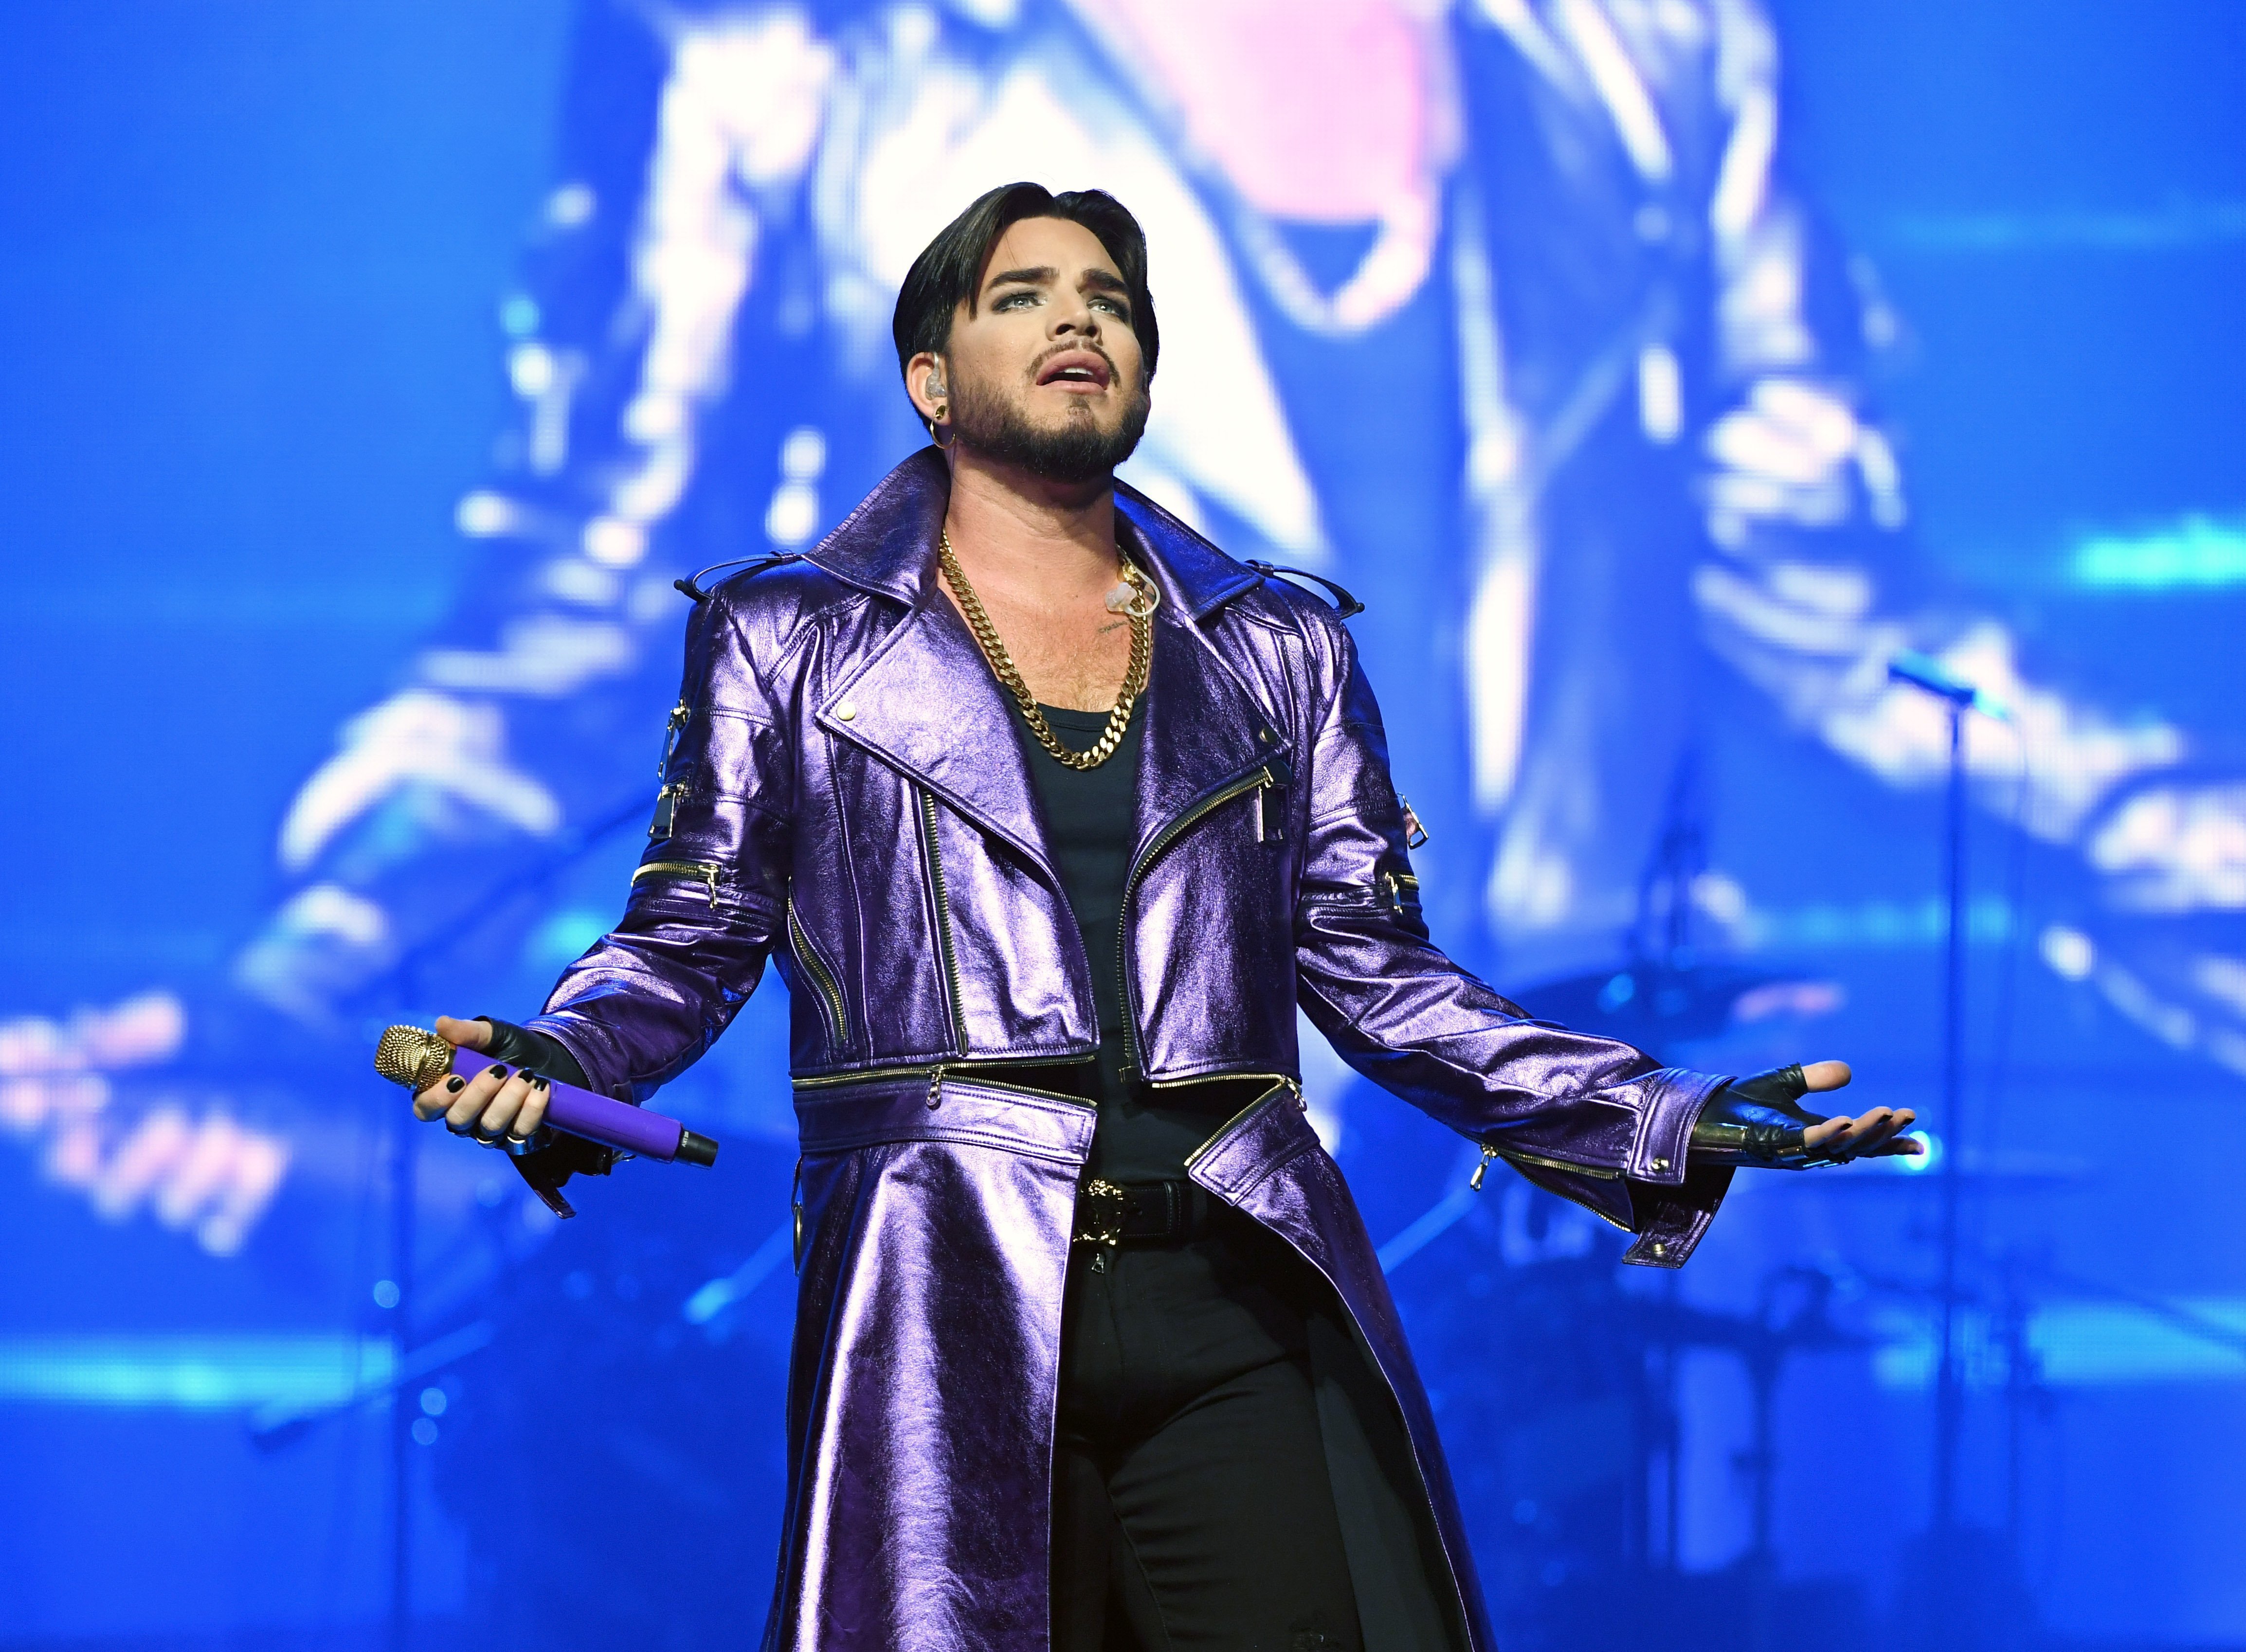 Singer Adam Lambert of Queen + Adam Lambert performs as the group kicks off its 10-date limited engagement, "The Crown Jewels," at Park Theater. Photos : Getty Images